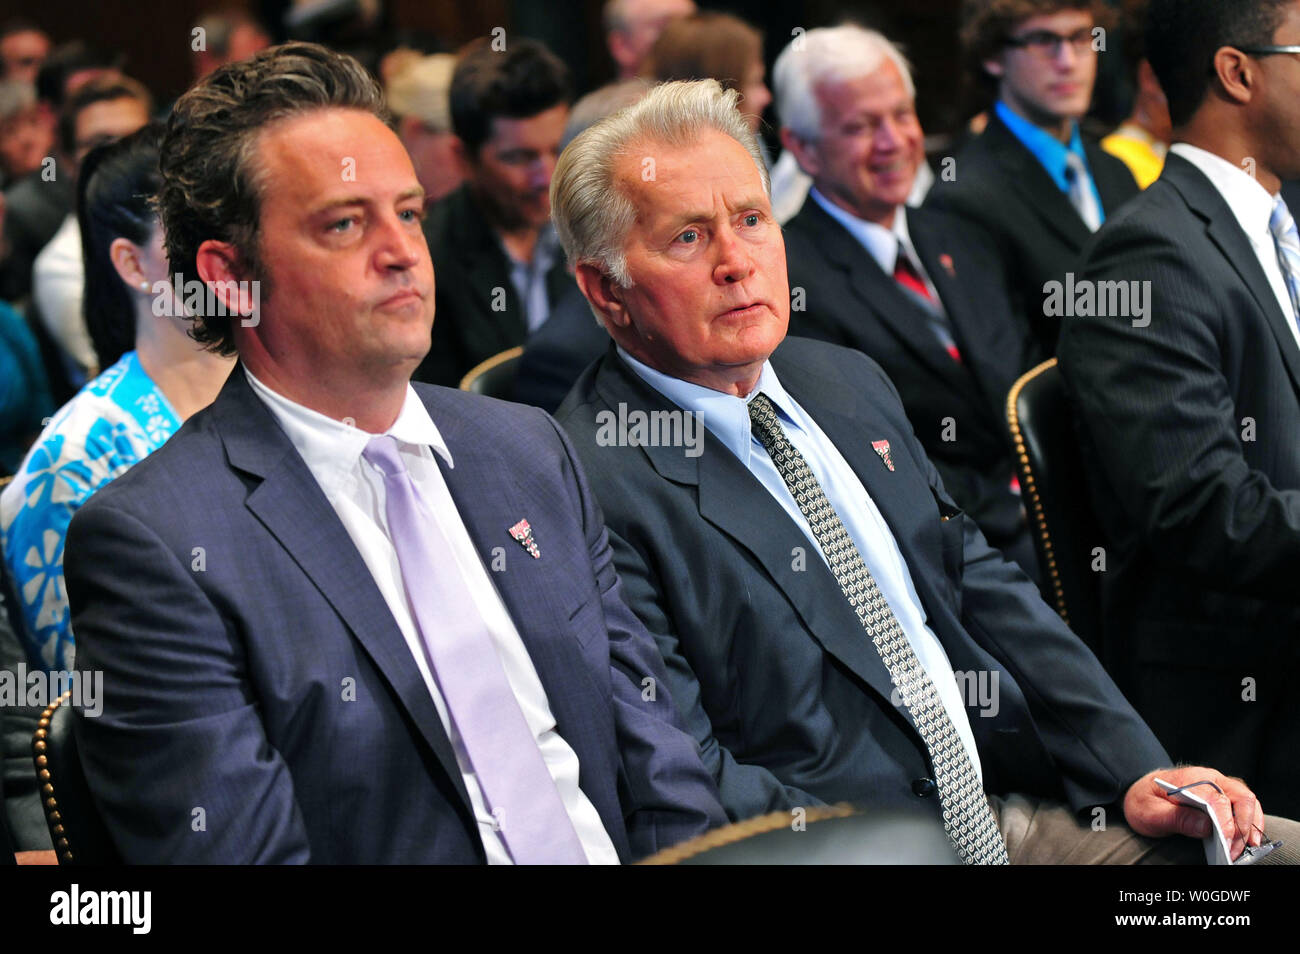 Actor Matthew Perry sits next to actor Martin Sheen during a Senate Judiciary Committee Crime and Judiciary Subcommittee hearing titled 'Drug and Veterans Treatment Courts: Seeking Cost-Effective Solutions for Protecting Public Safety and Reducing Recidivism,' on Capitol Hill in Washington, D.C. on July 19, 2011.  UPI/Kevin Dietsch Stock Photo